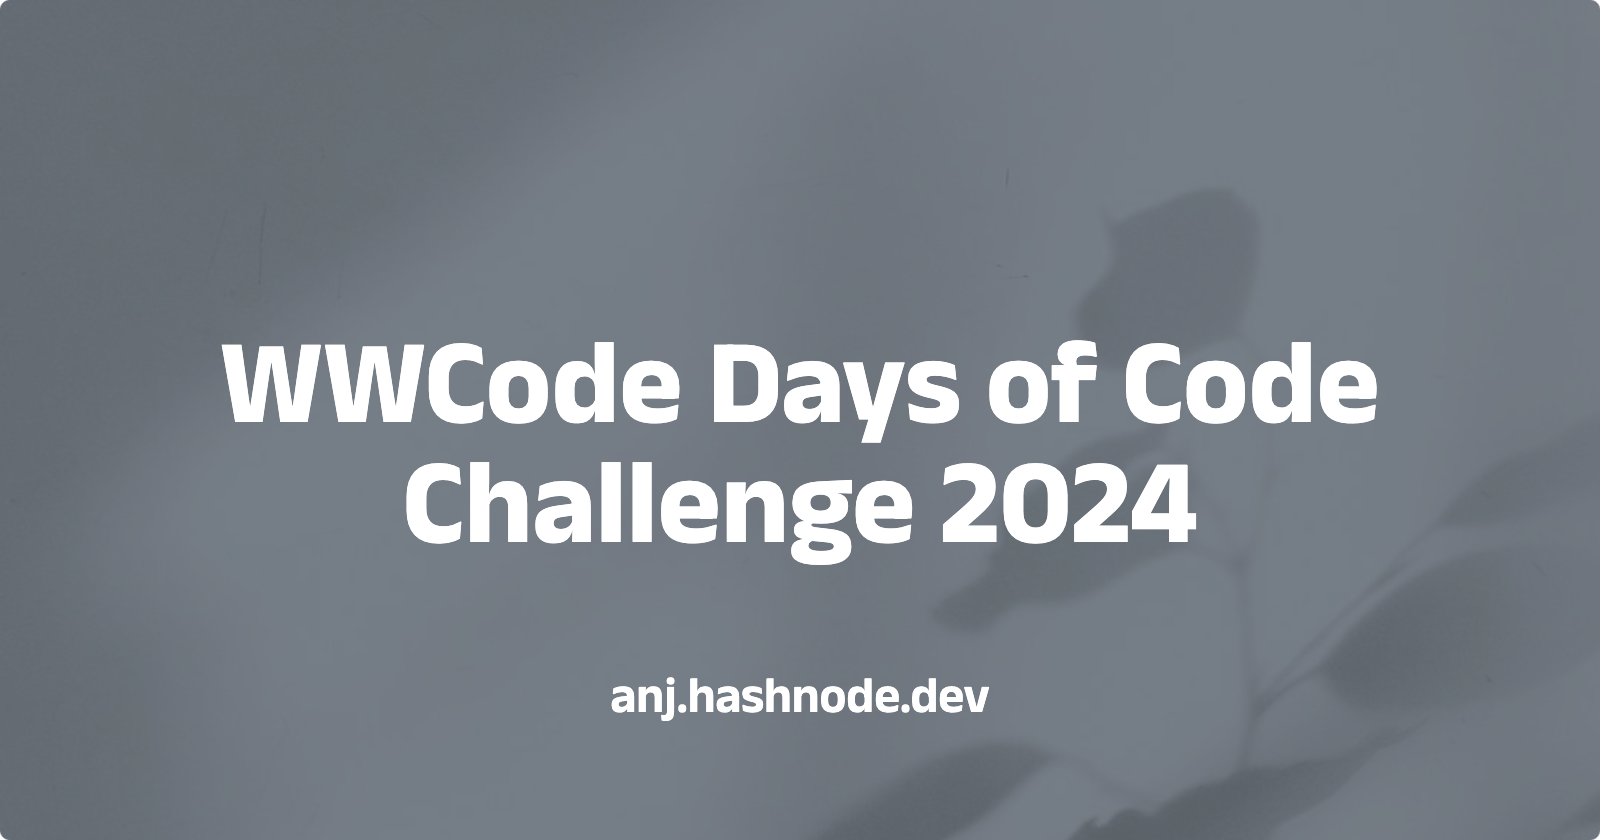 Coding Challenge #04: Write a program to find the sum of all elements in a list